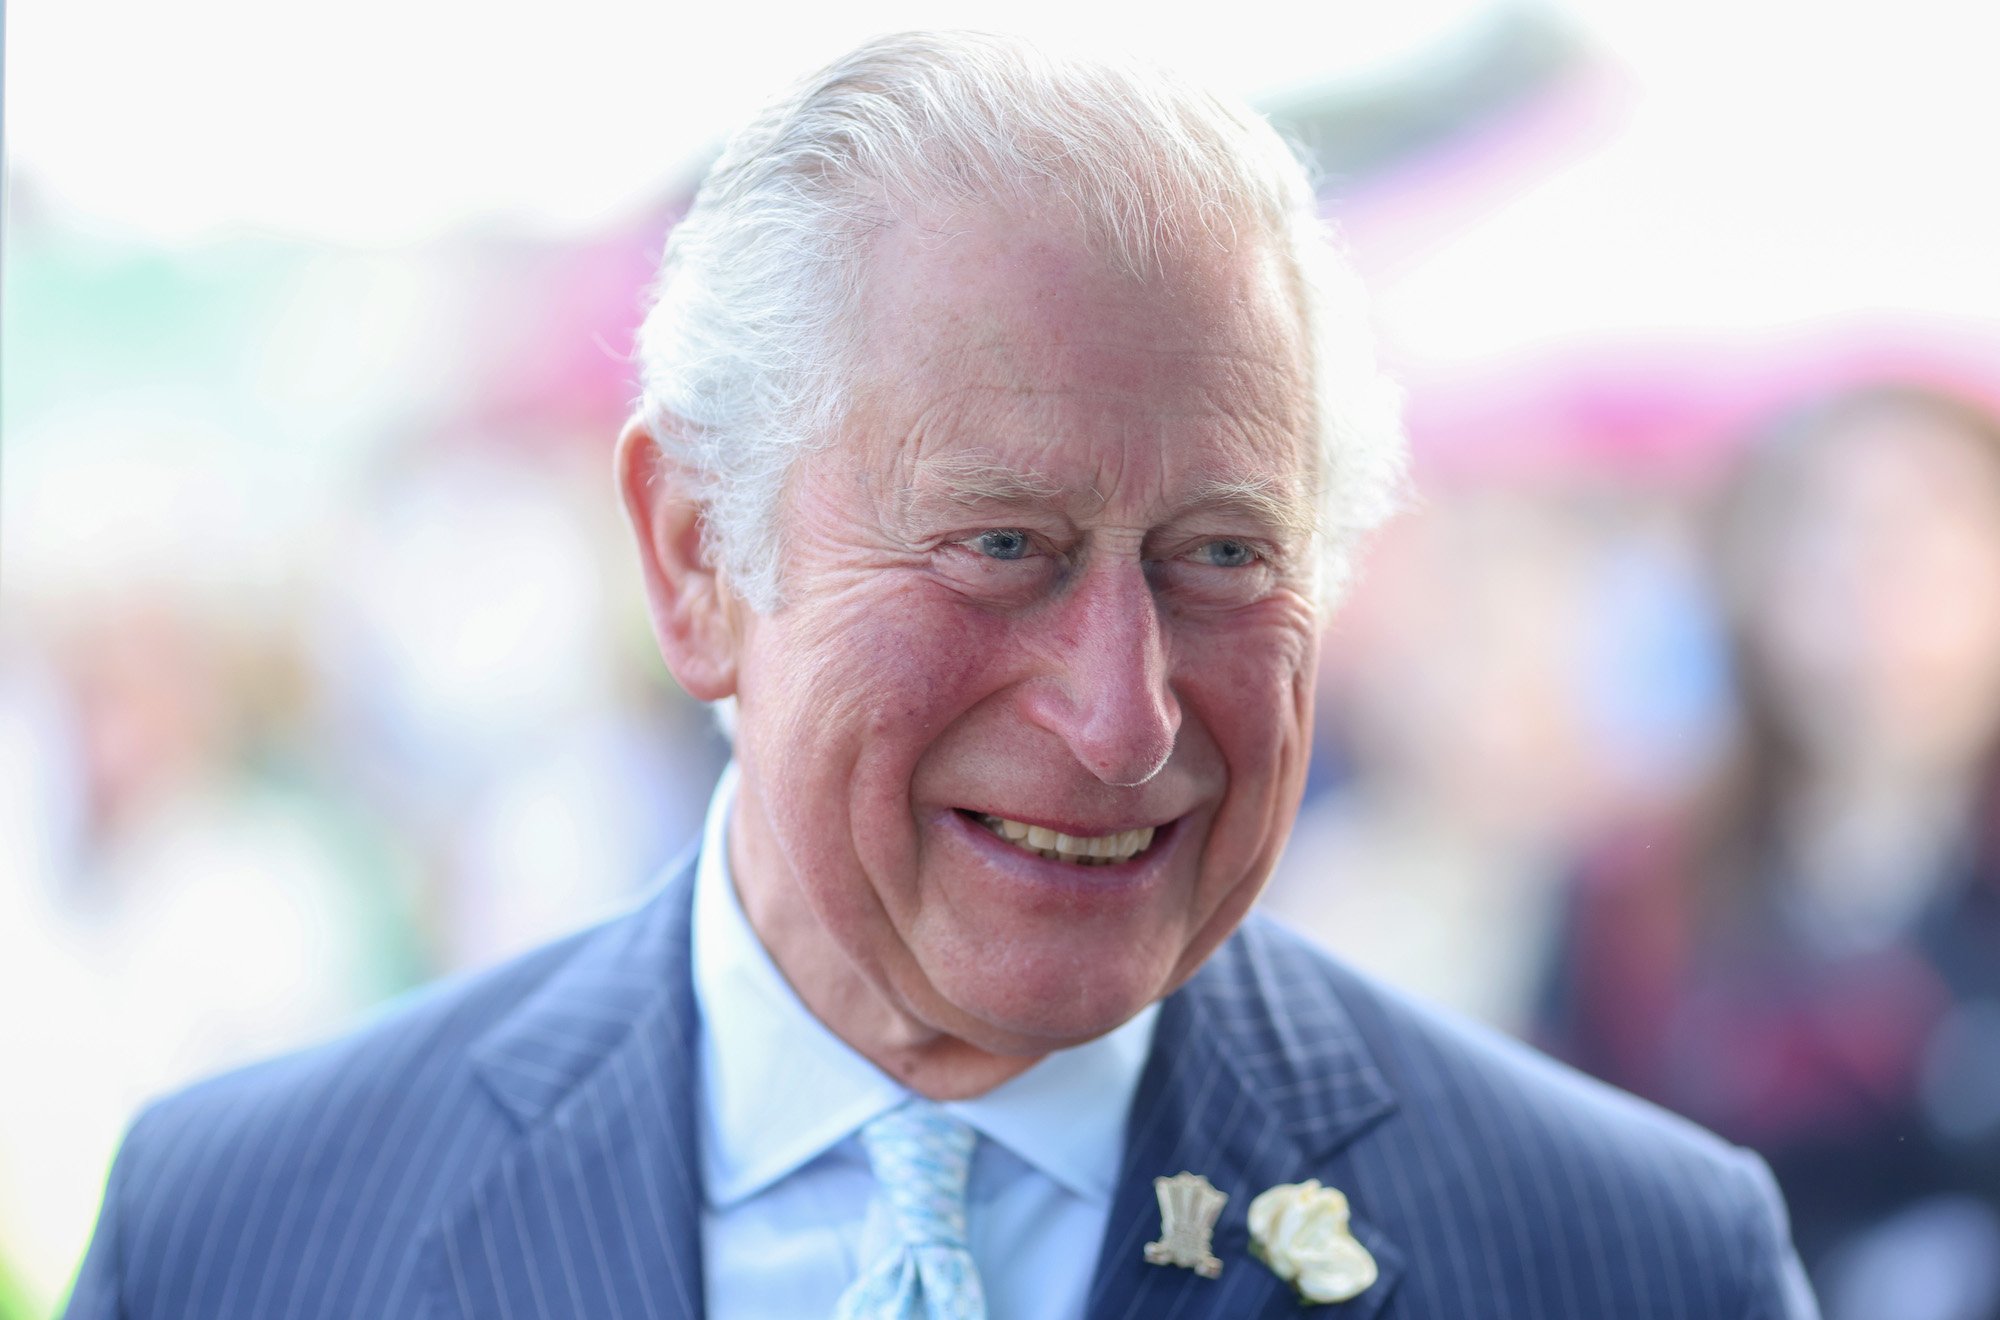 Prince Charles smiling in front of a blurred crowd